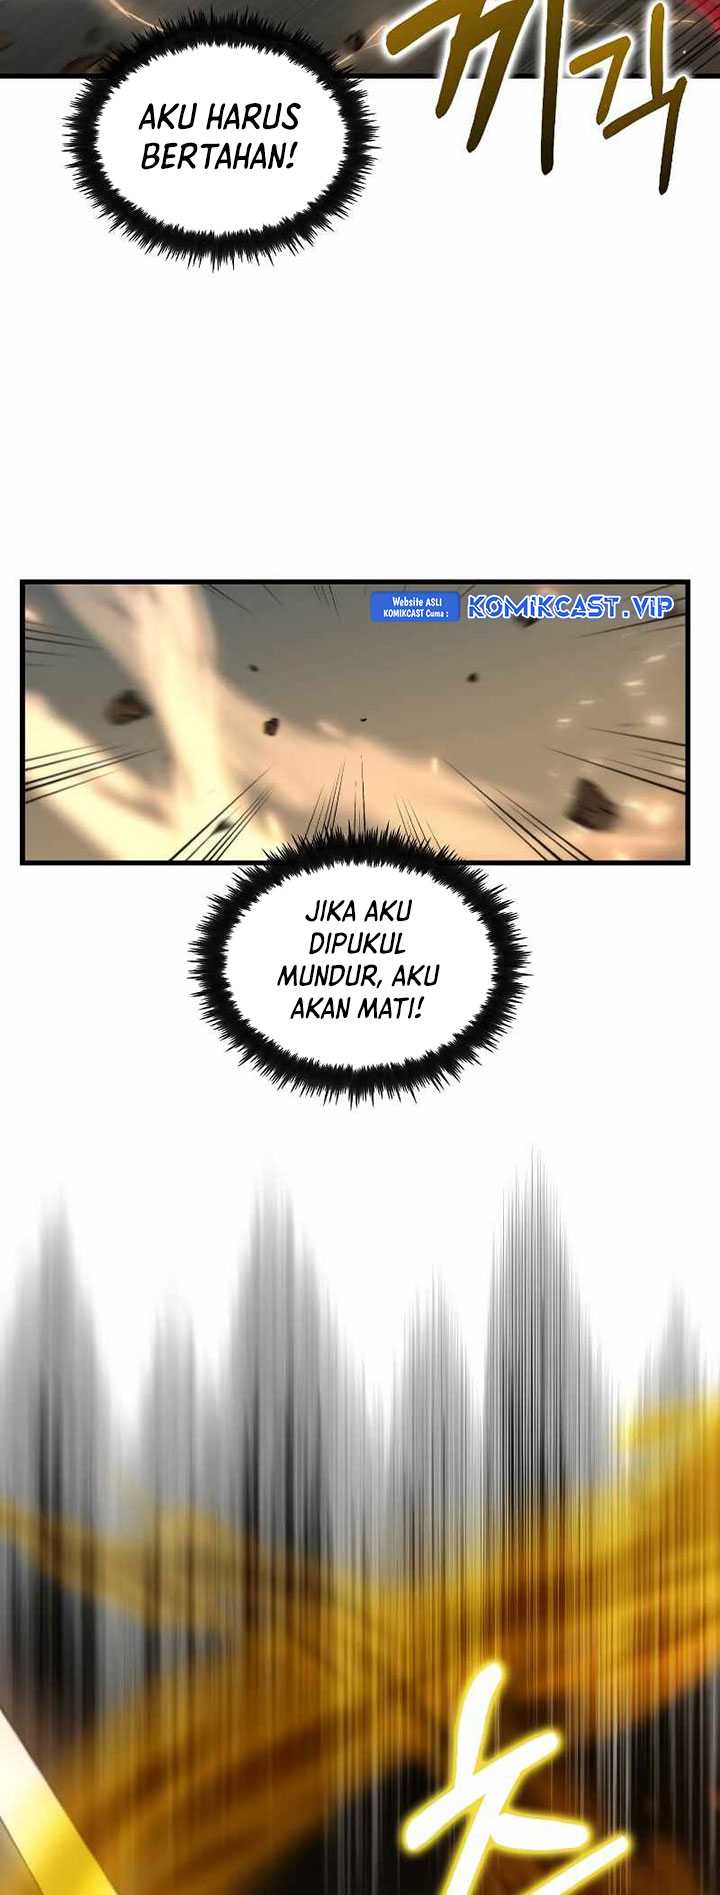 Doctor’s Rebirth Chapter 124